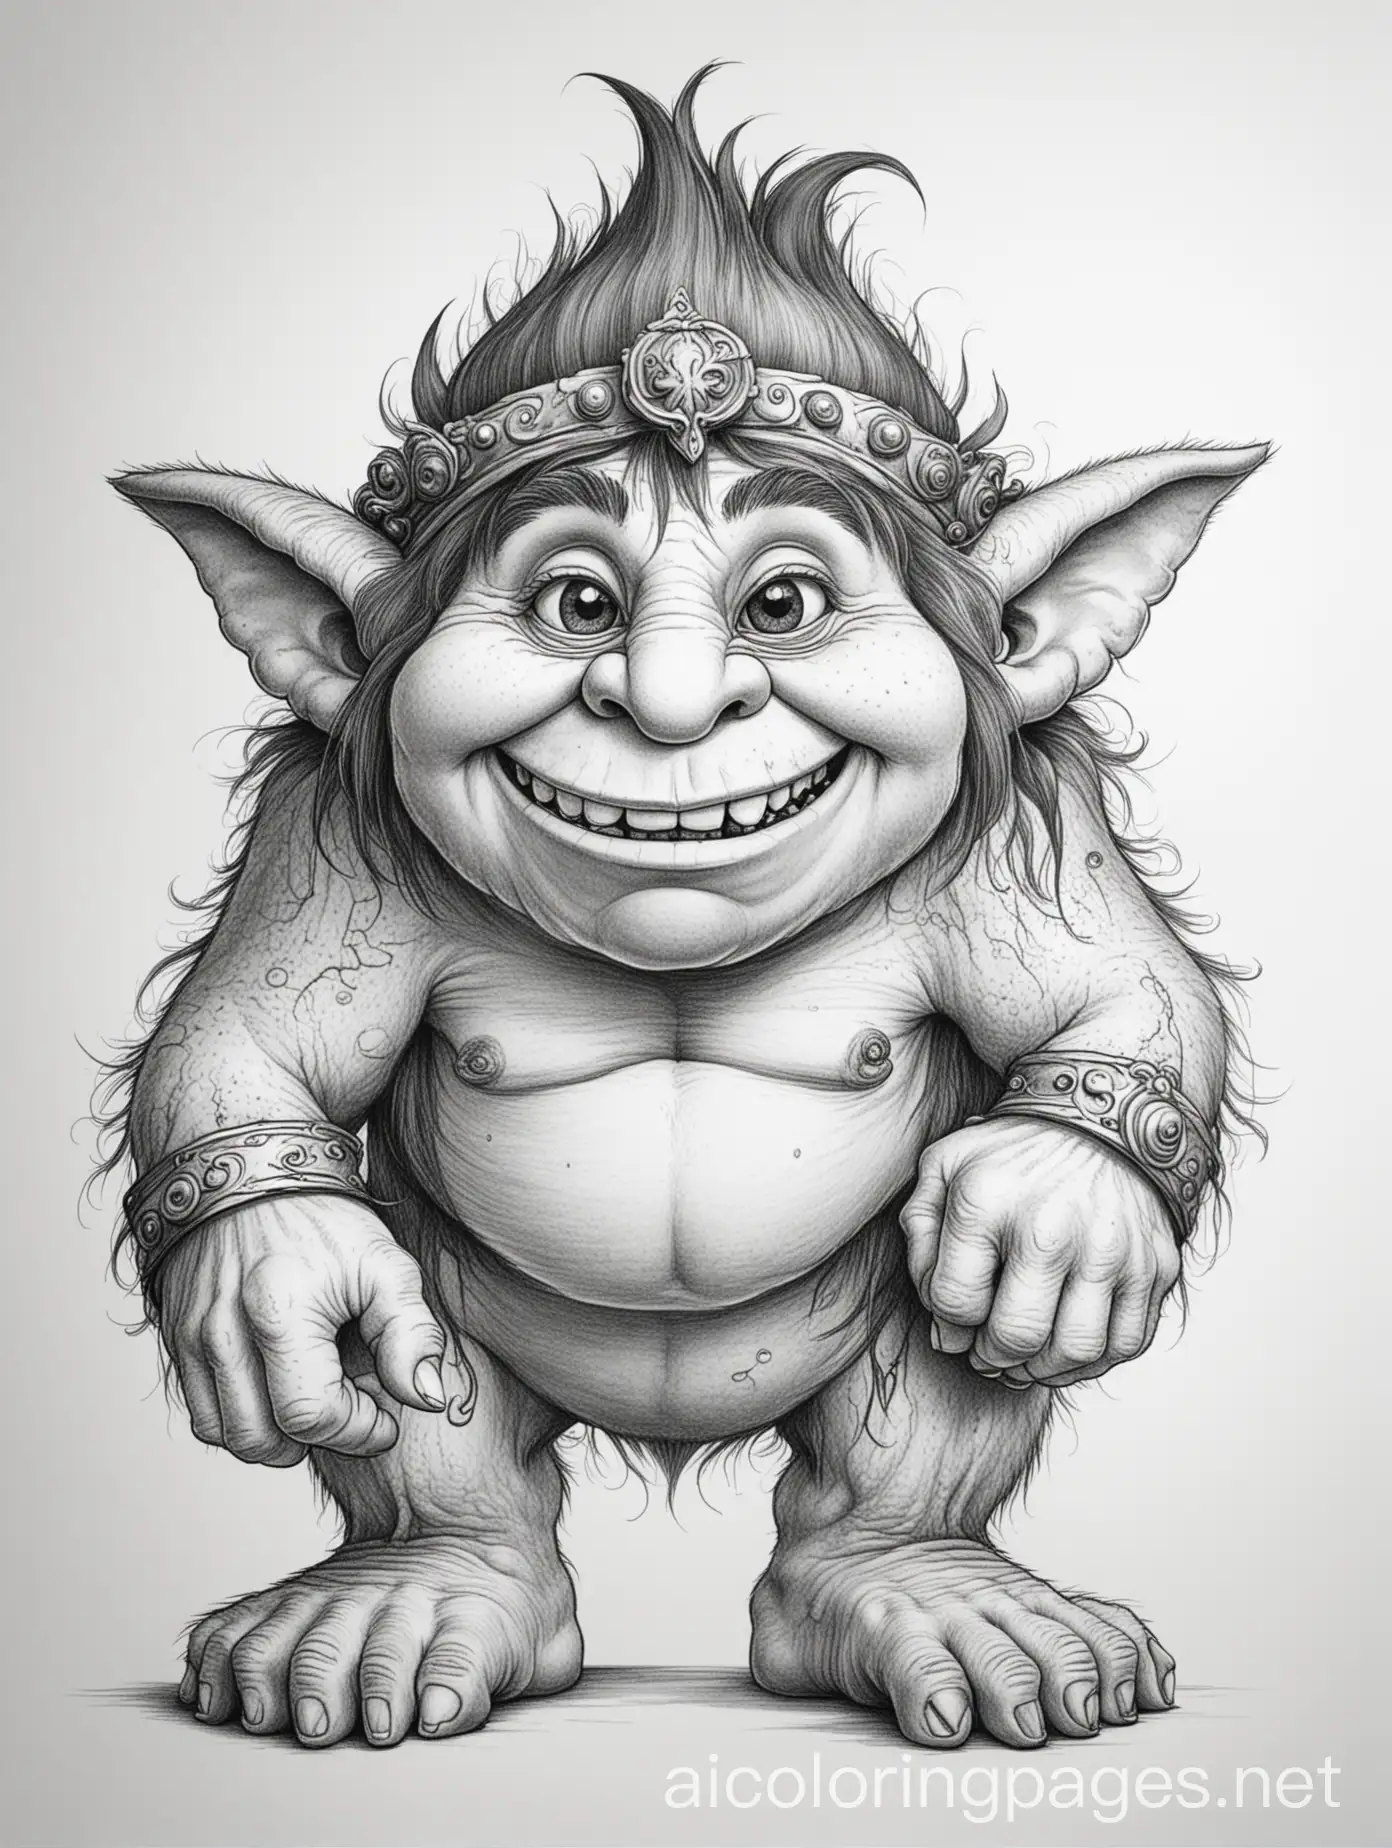 slobbery troll, Coloring Page, black and white, line art, white background, Simplicity, Ample White Space. The background of the coloring page is plain white to make it easy for young children to color within the lines. The outlines of all the subjects are easy to distinguish, making it simple for kids to color without too much difficulty